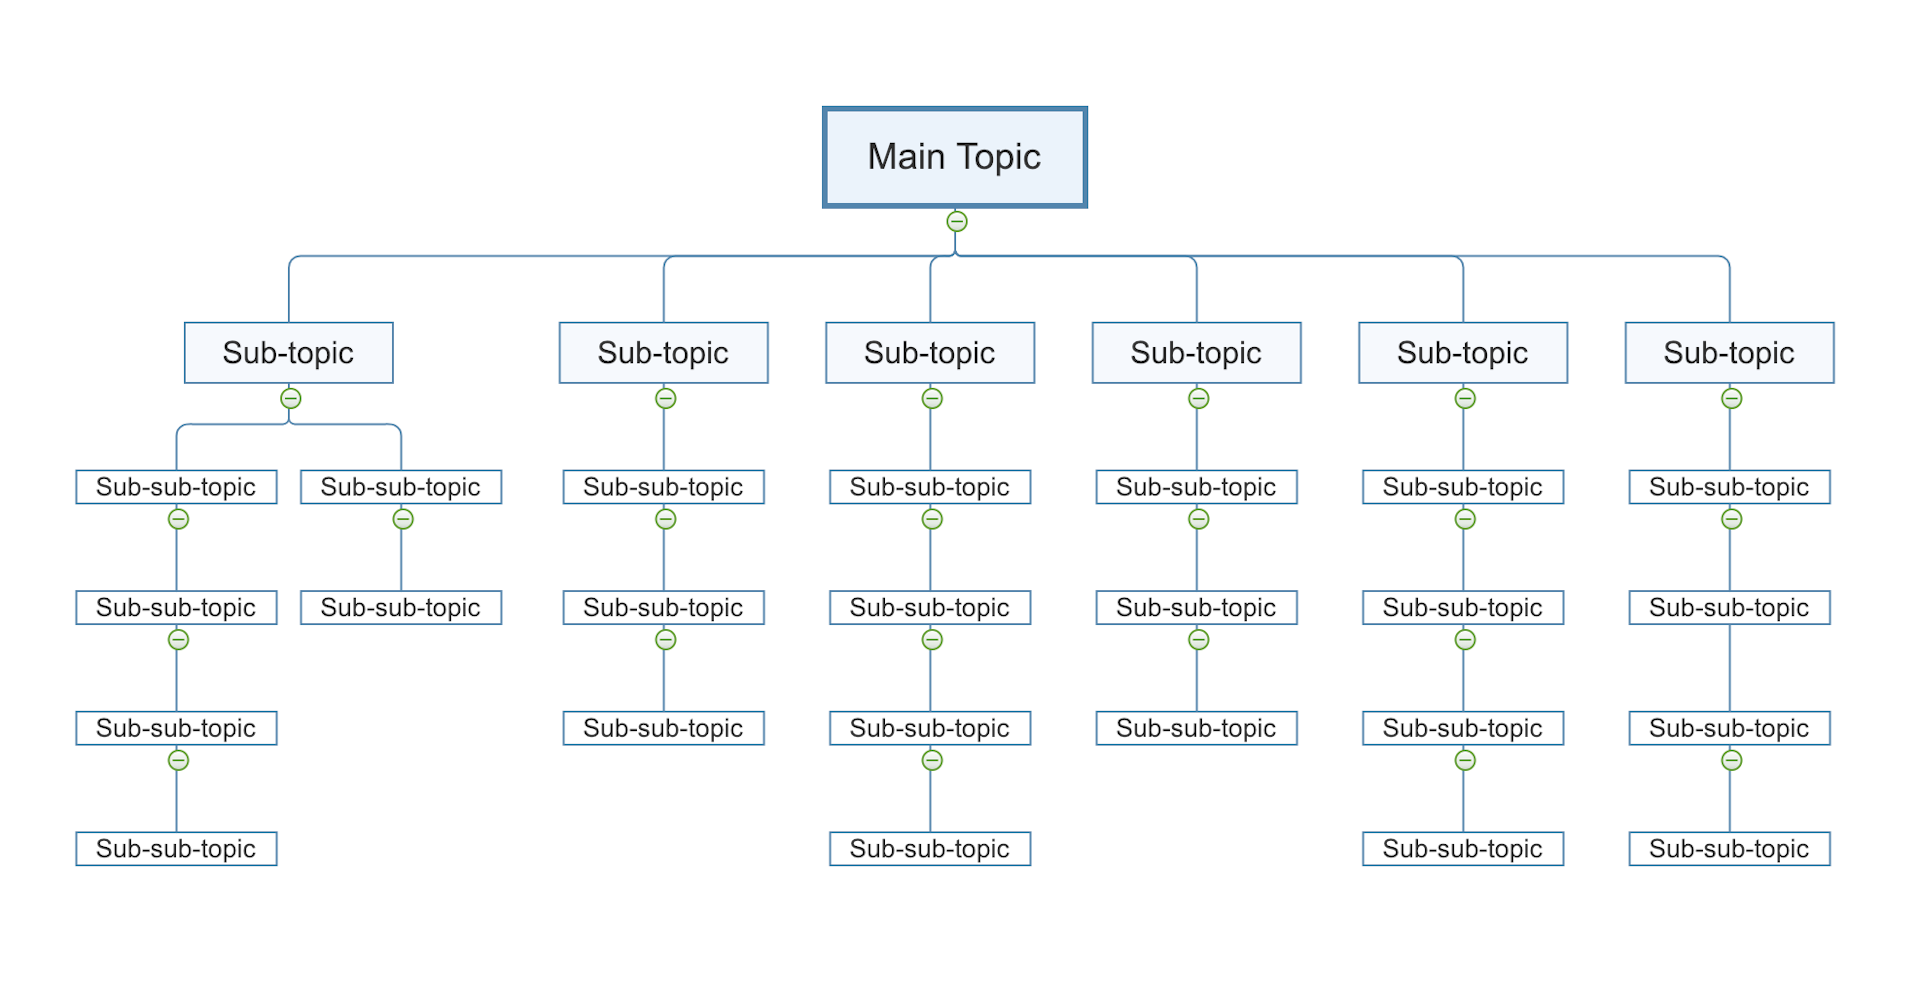 An example structure of a topic cluster